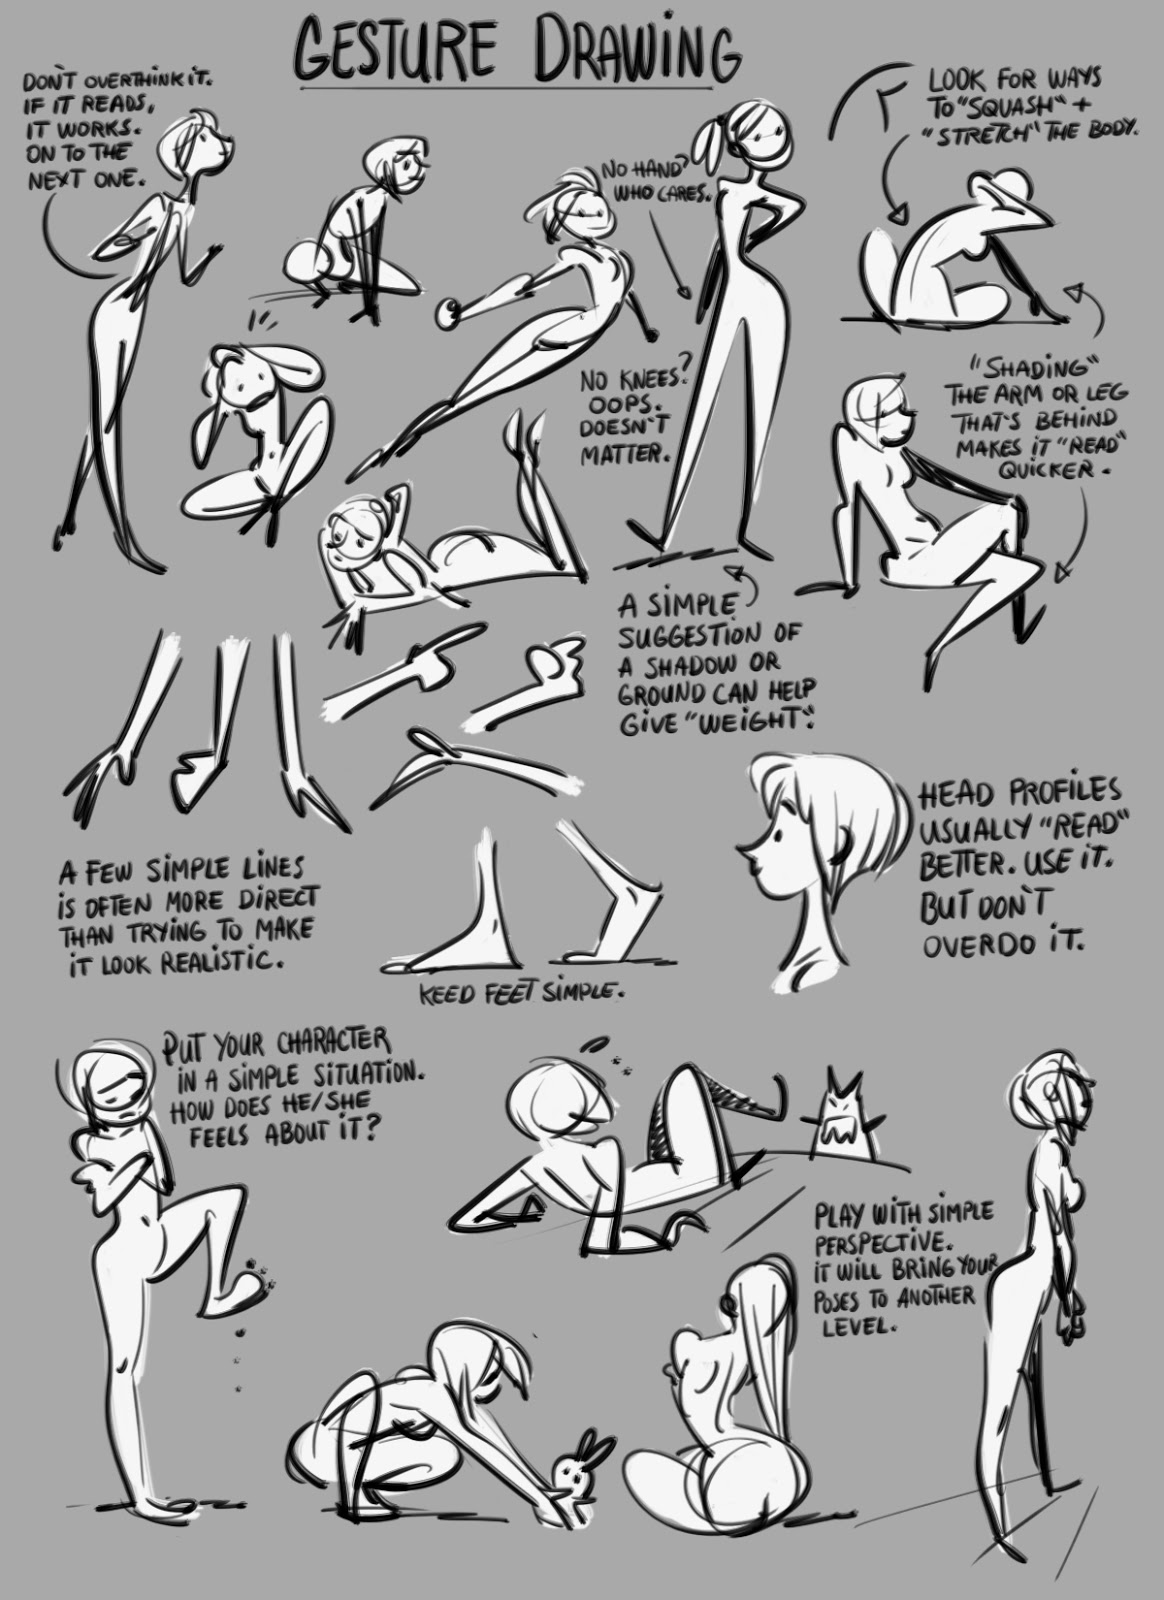 Gesture Drawing | 21 Draw